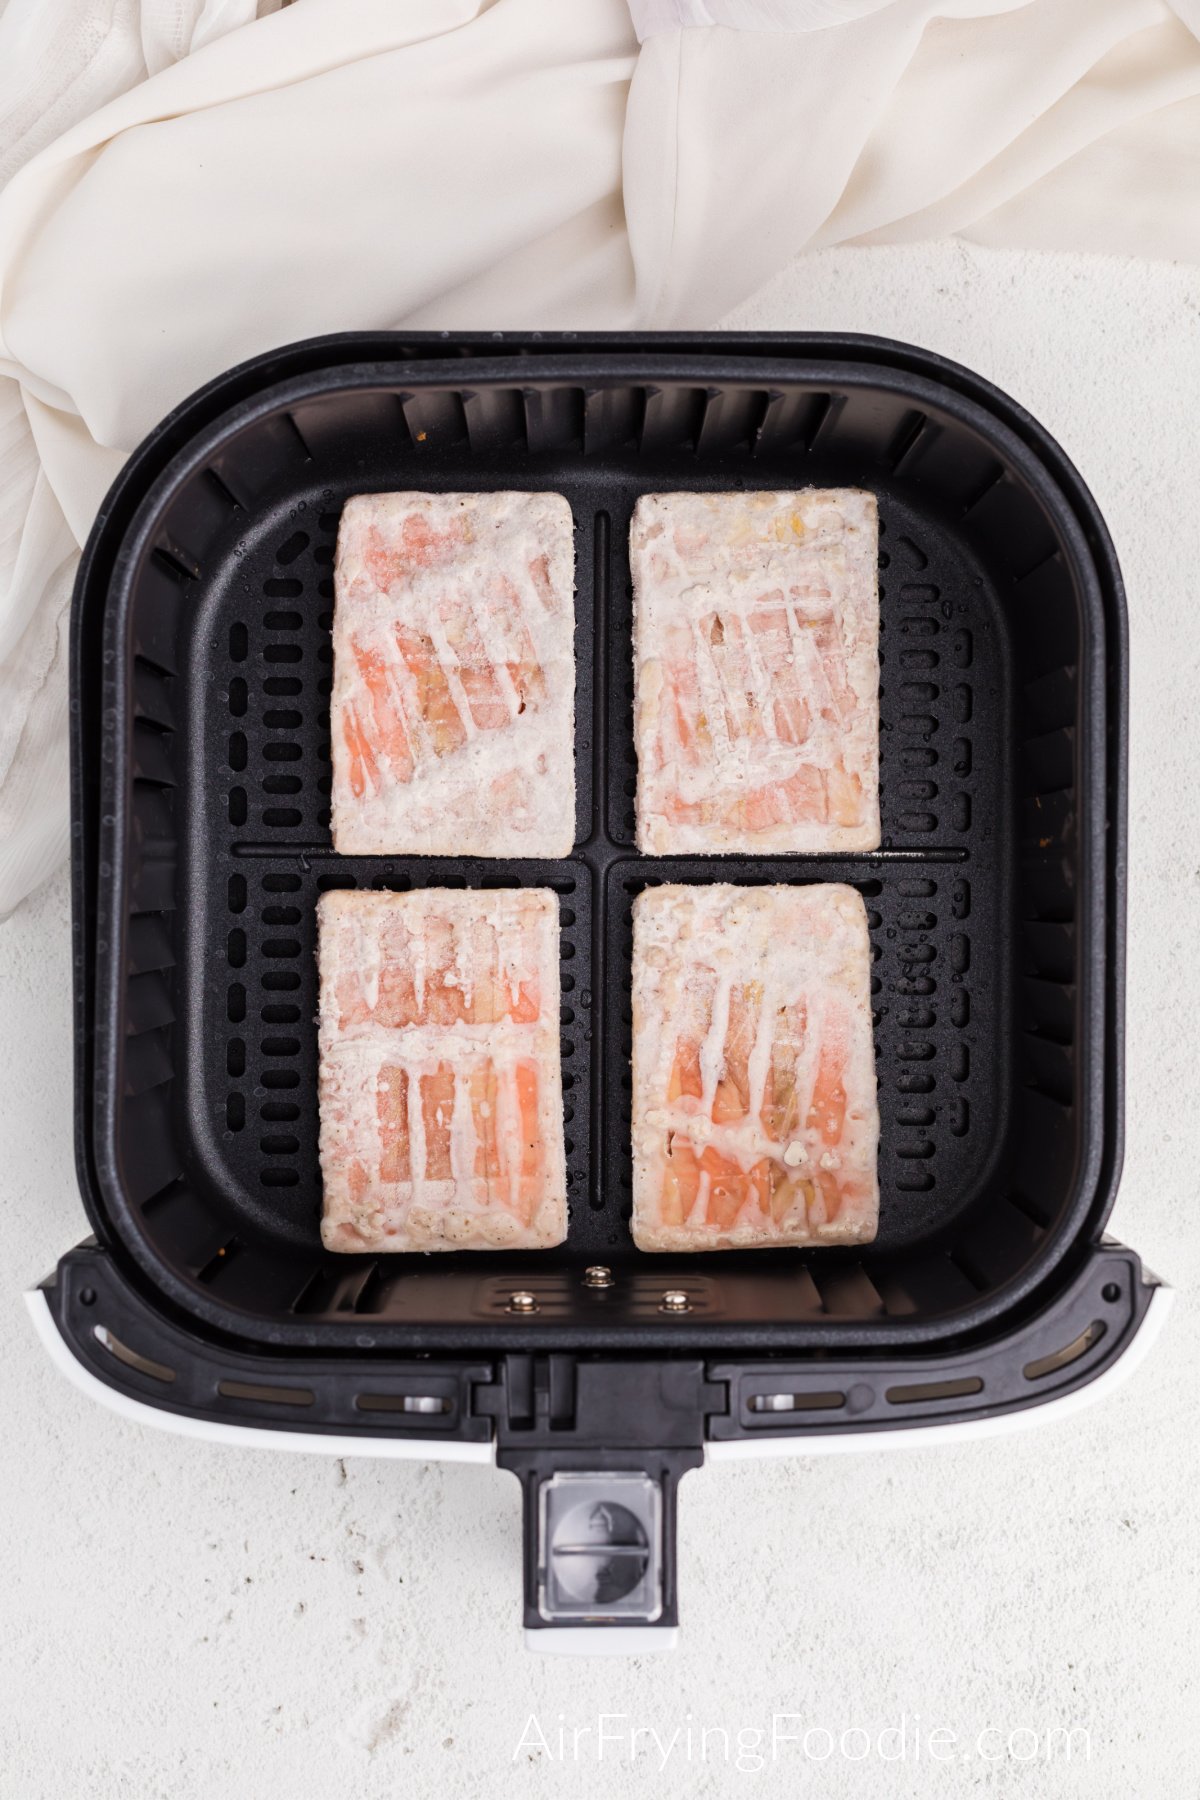 frozen salmon in air fryer basket, ready to cook.